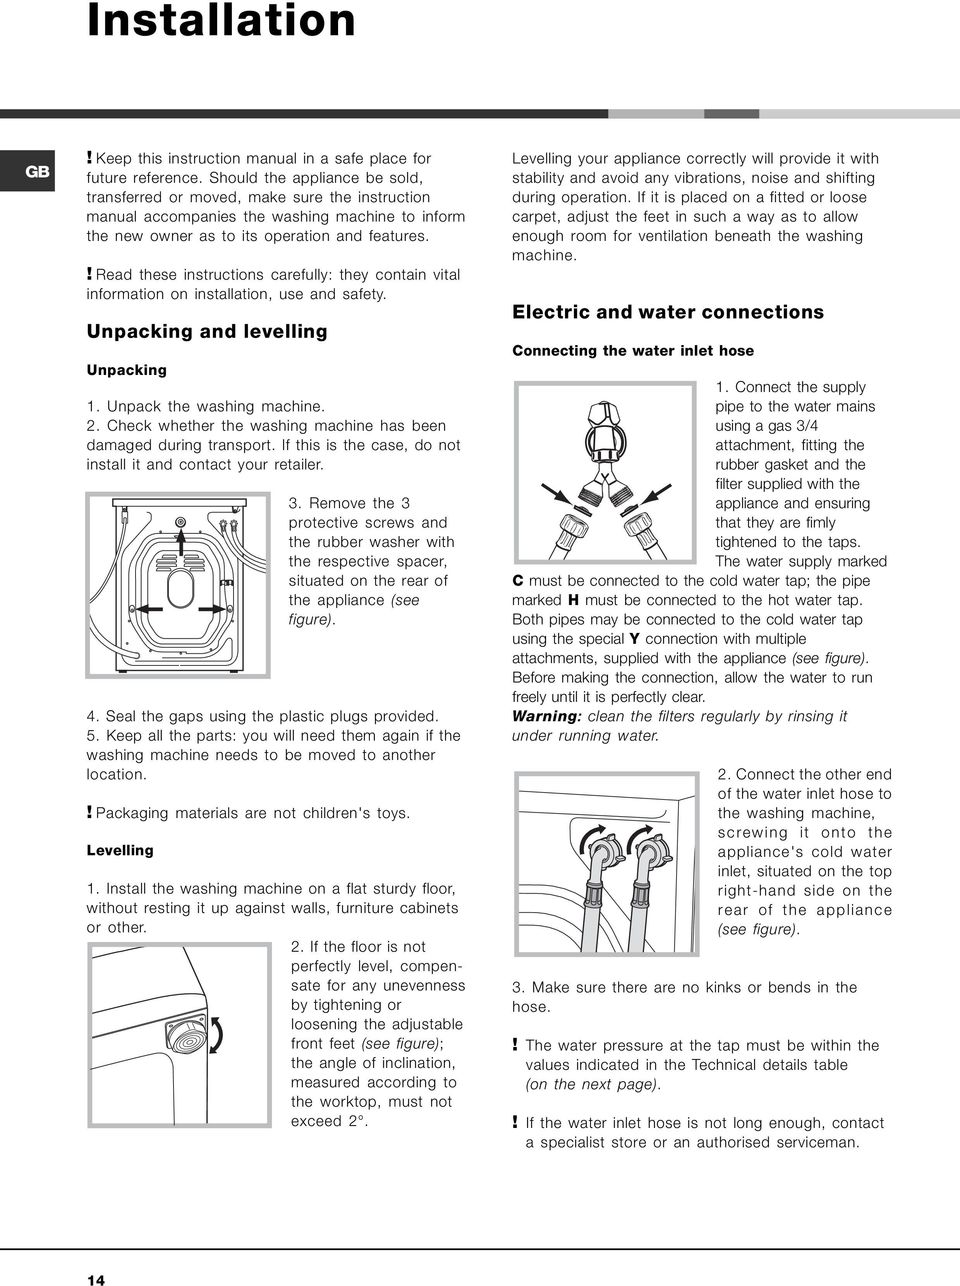 ! Read these instructions carefully: they contain vital information on installation, use and safety. Unpacking and levelling Unpacking 1. Unpack the washing machine. 2.